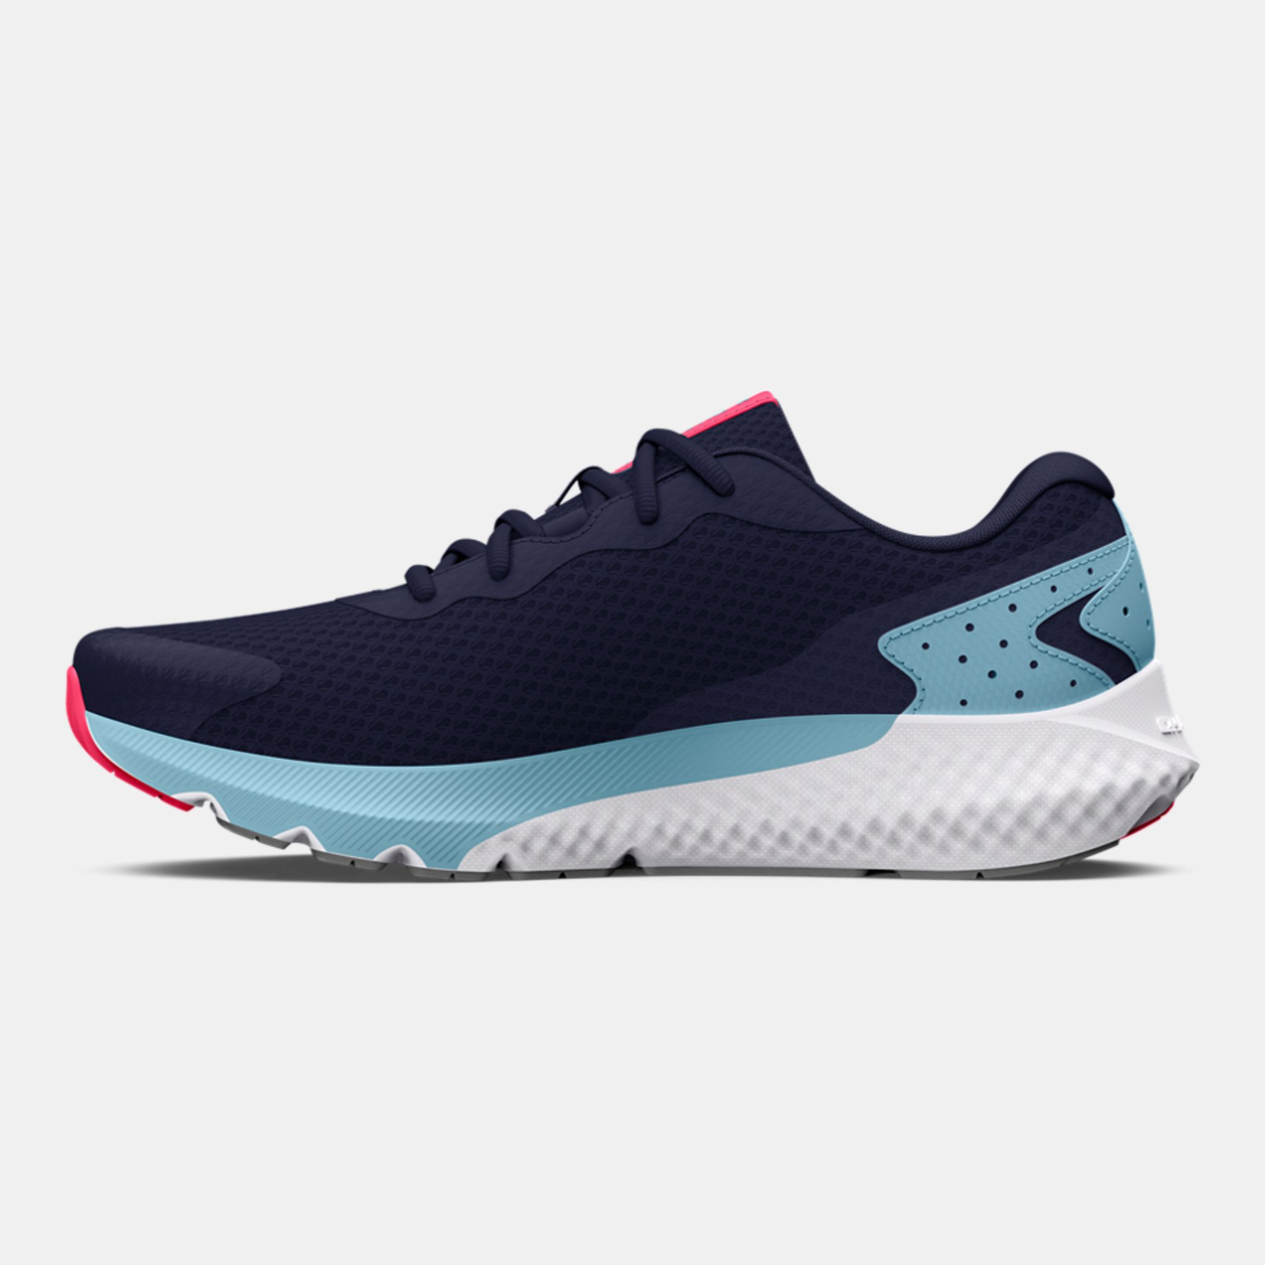 Under Armour Midnight Navy/Blizzard/Pink Shock Charged Rogue 3